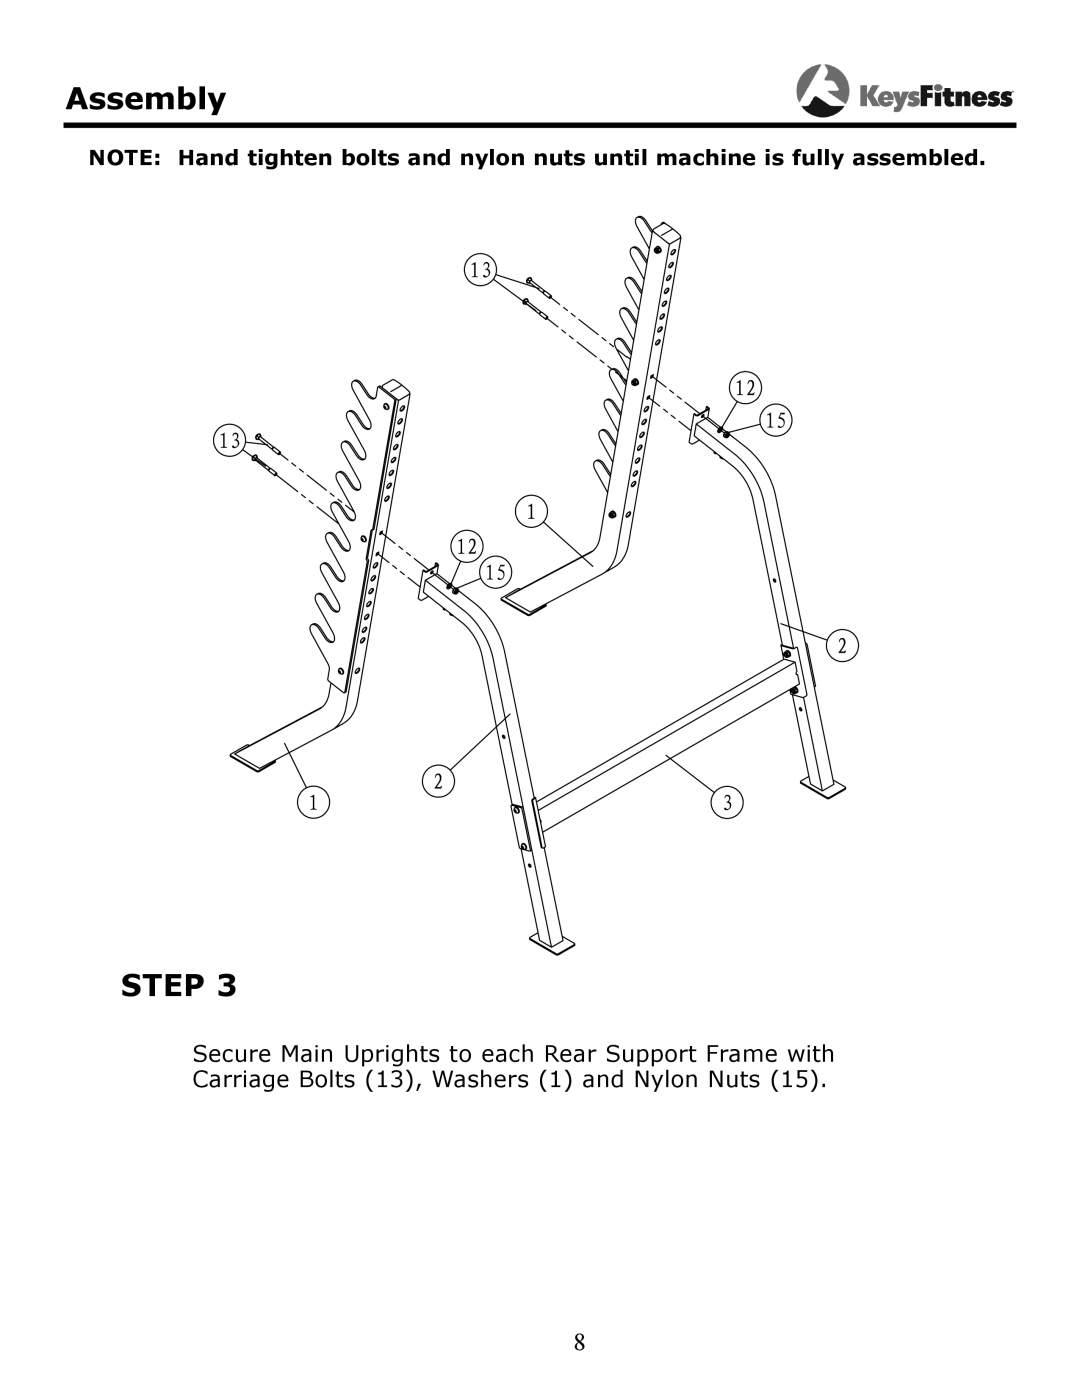 Keys Fitness KF-SS owner manual Assembly, Step, Secure Main Uprights to each Rear Support Frame with 